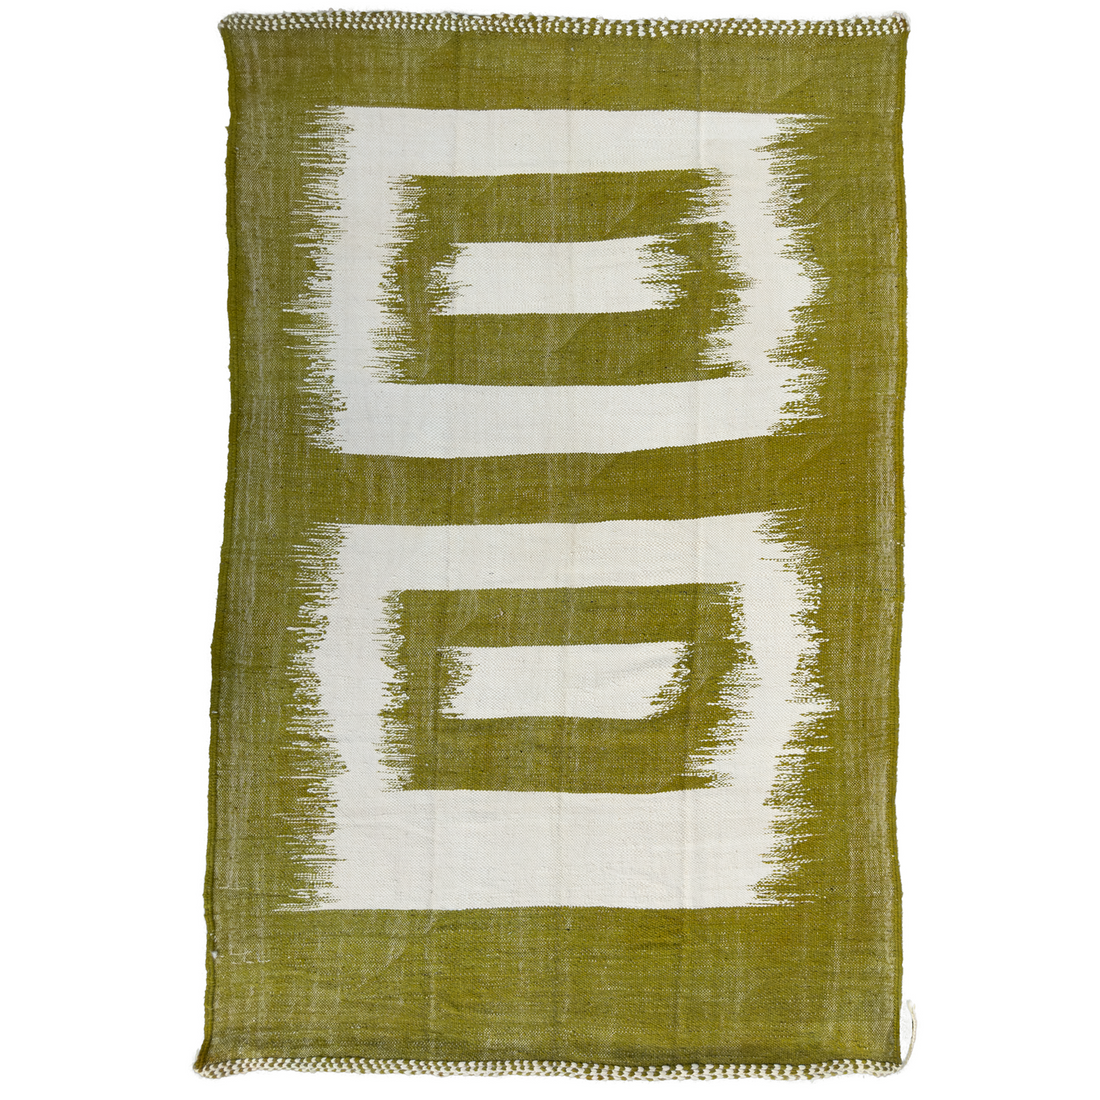 A minimalistic design with the practicality of no pile construction. The rug features a captivating contrast between cream and olive green colors, creating a soothing and natural aesthetic.